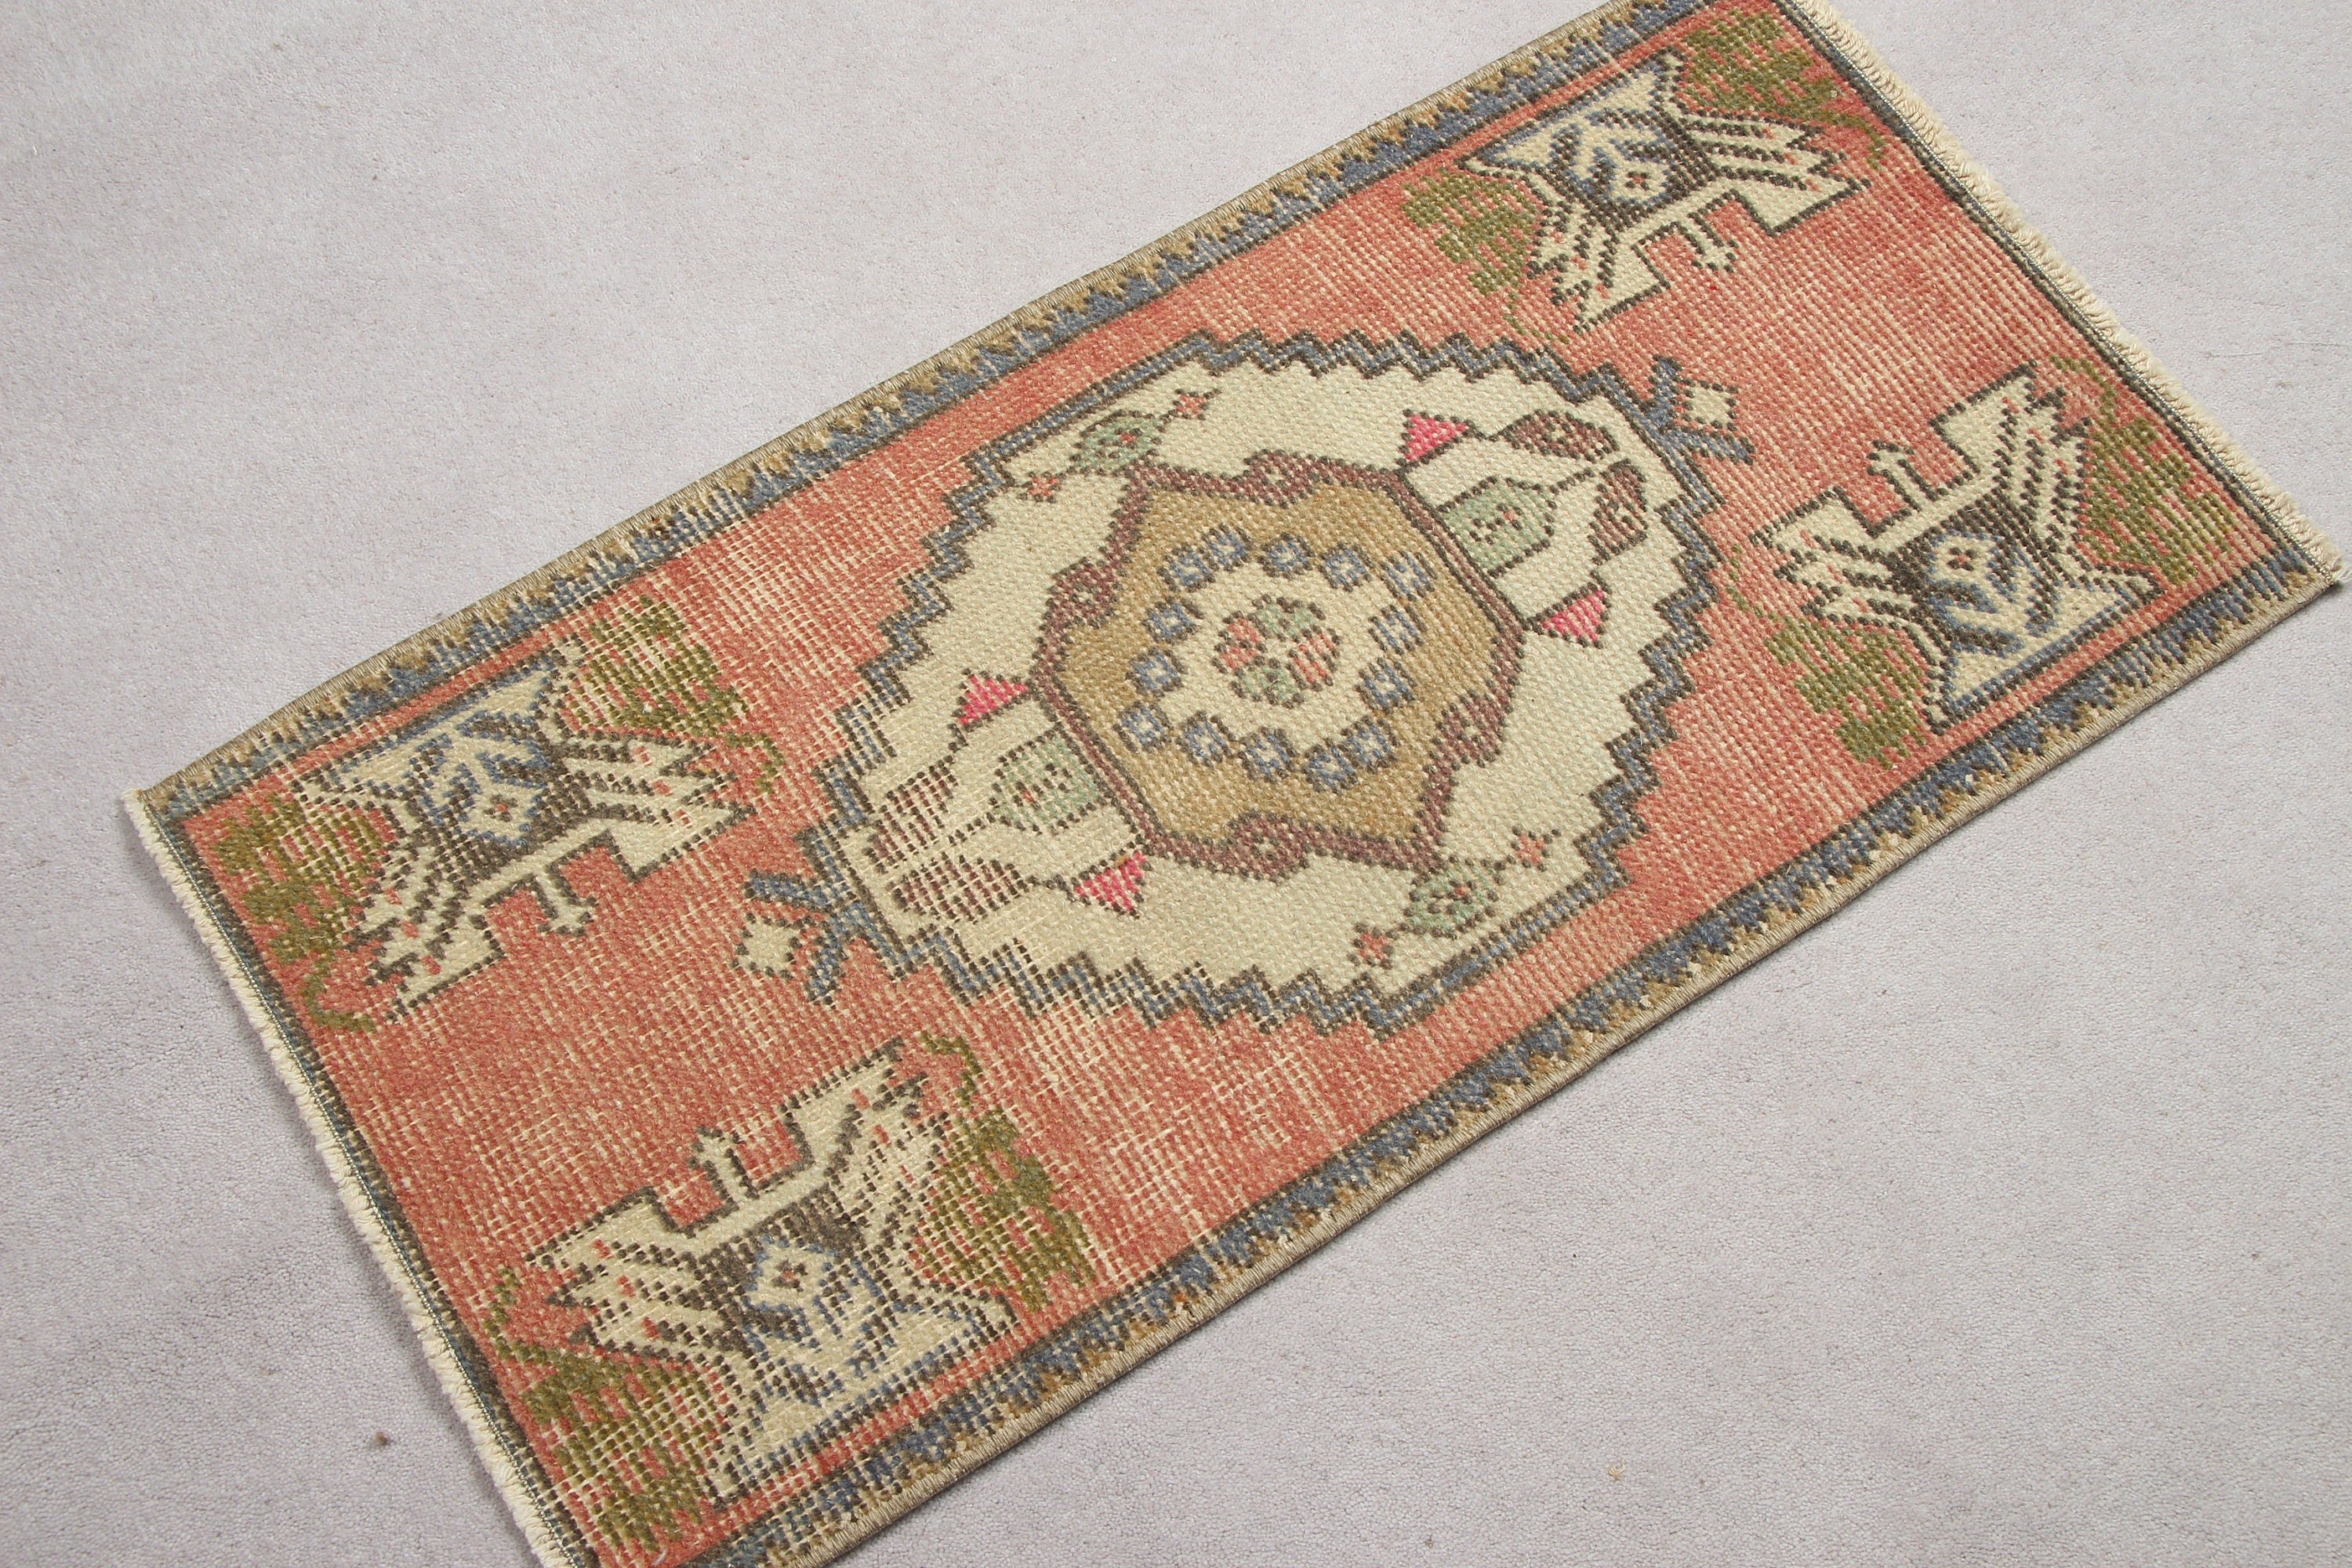 Red Home Decor Rug, 1.5x3 ft Small Rugs, Vintage Rugs, Antique Rugs, Rugs for Entry, Oushak Rug, Turkish Rug, Door Mat Rugs, Bath Rug